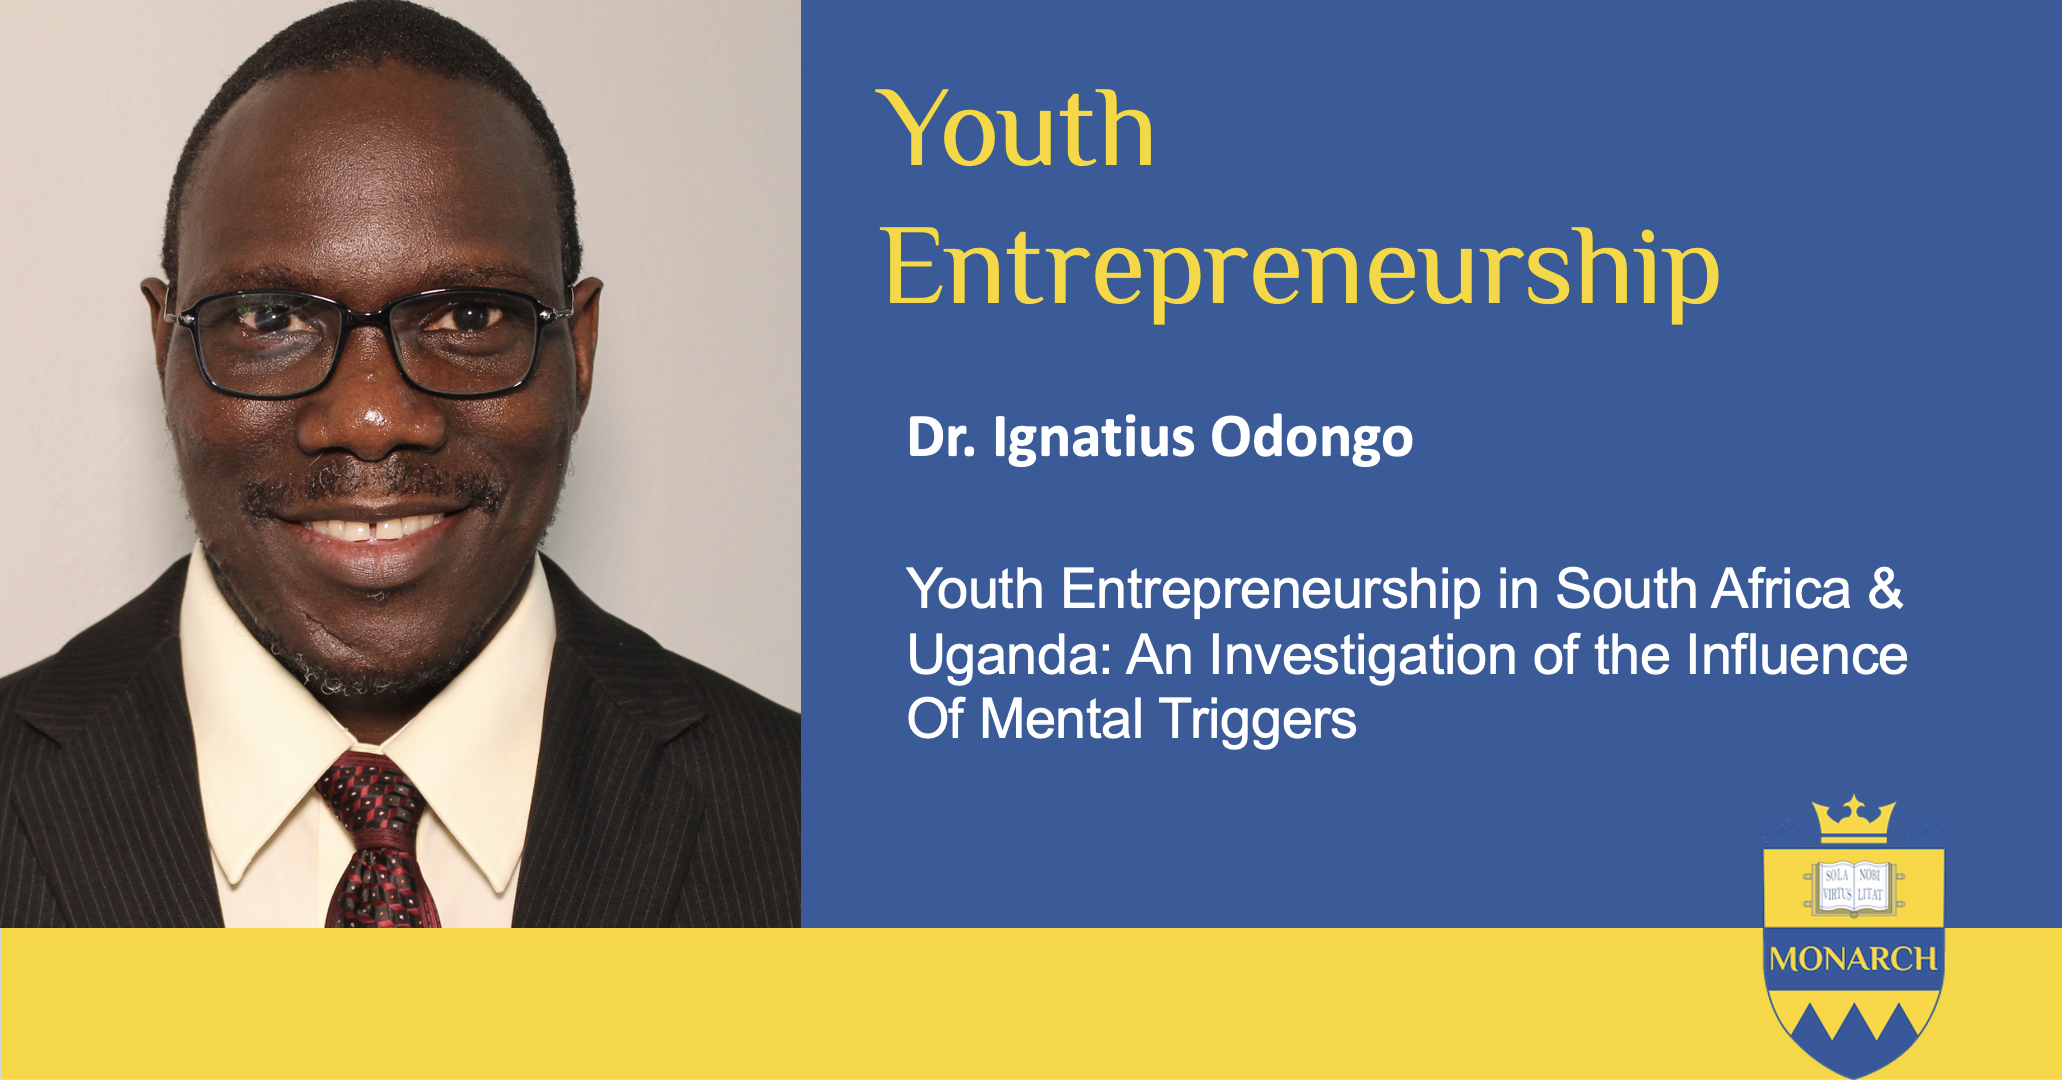 Youth Entrepreneurship and the Influence of Mental Triggers